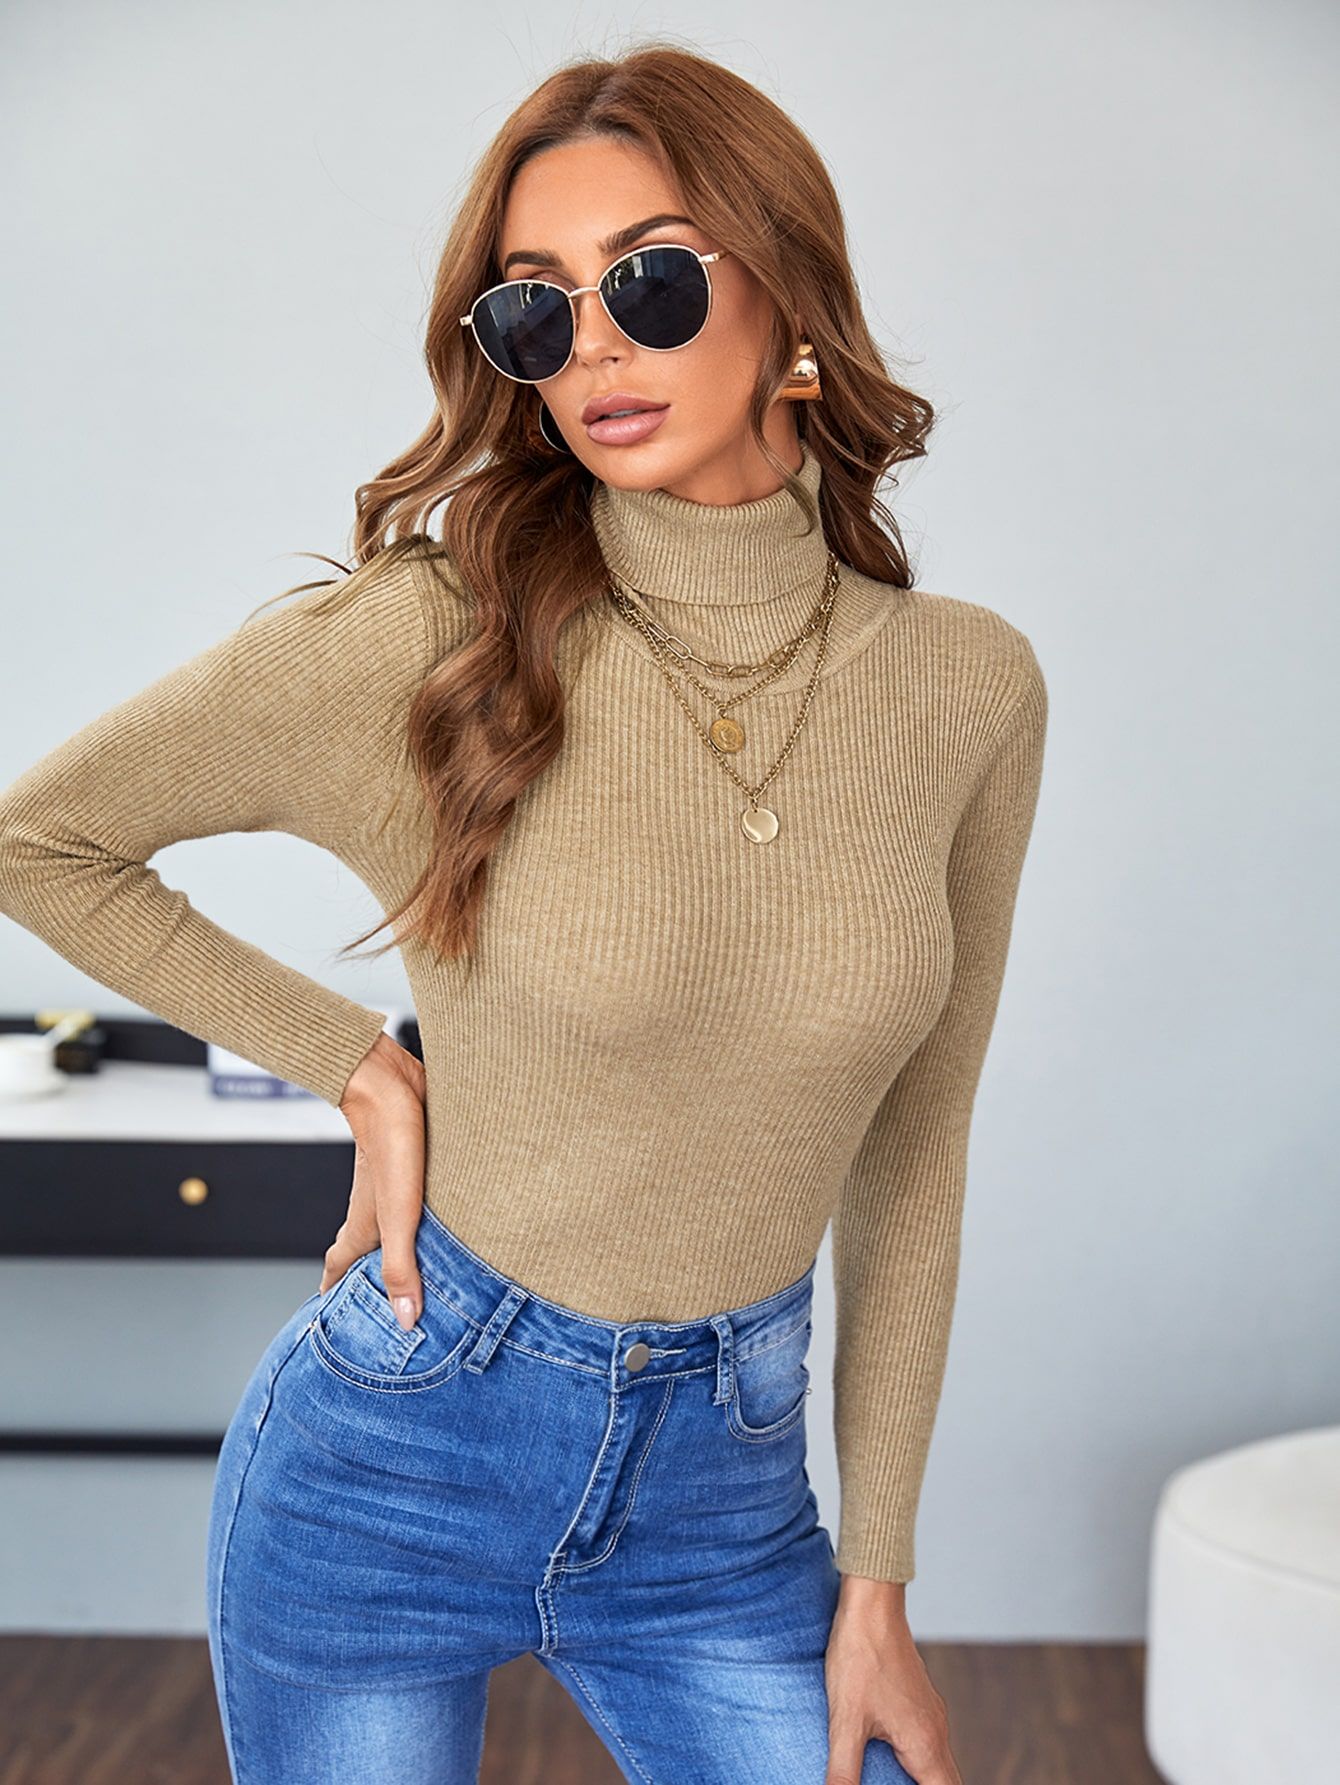 Turtleneck Ribbed Knit Sweater | SHEIN